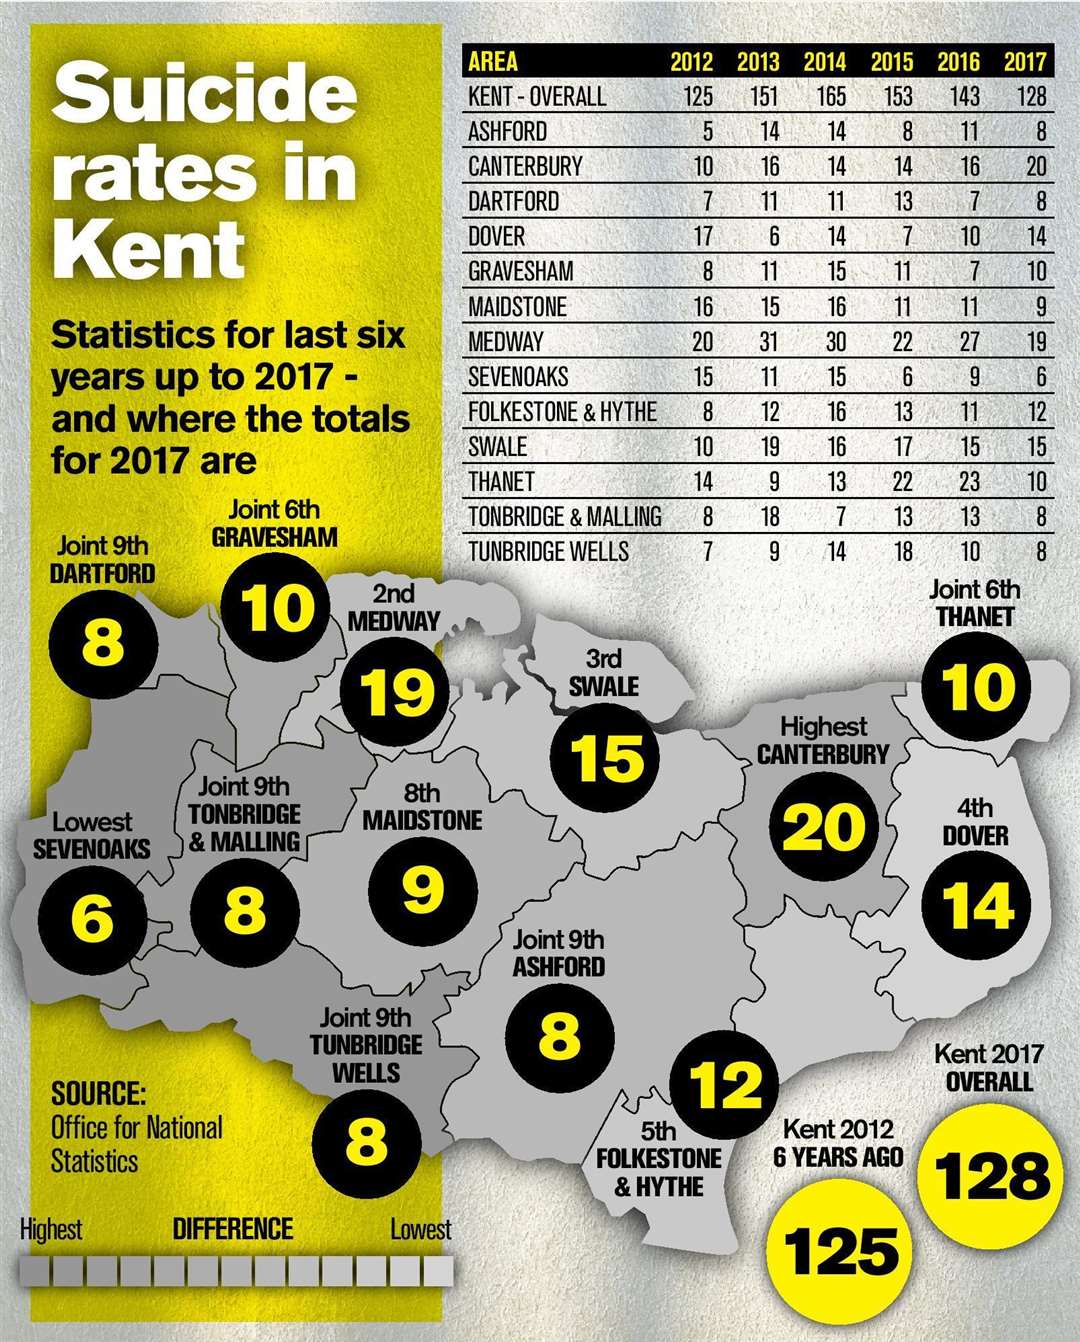 Suicide rates in Kent